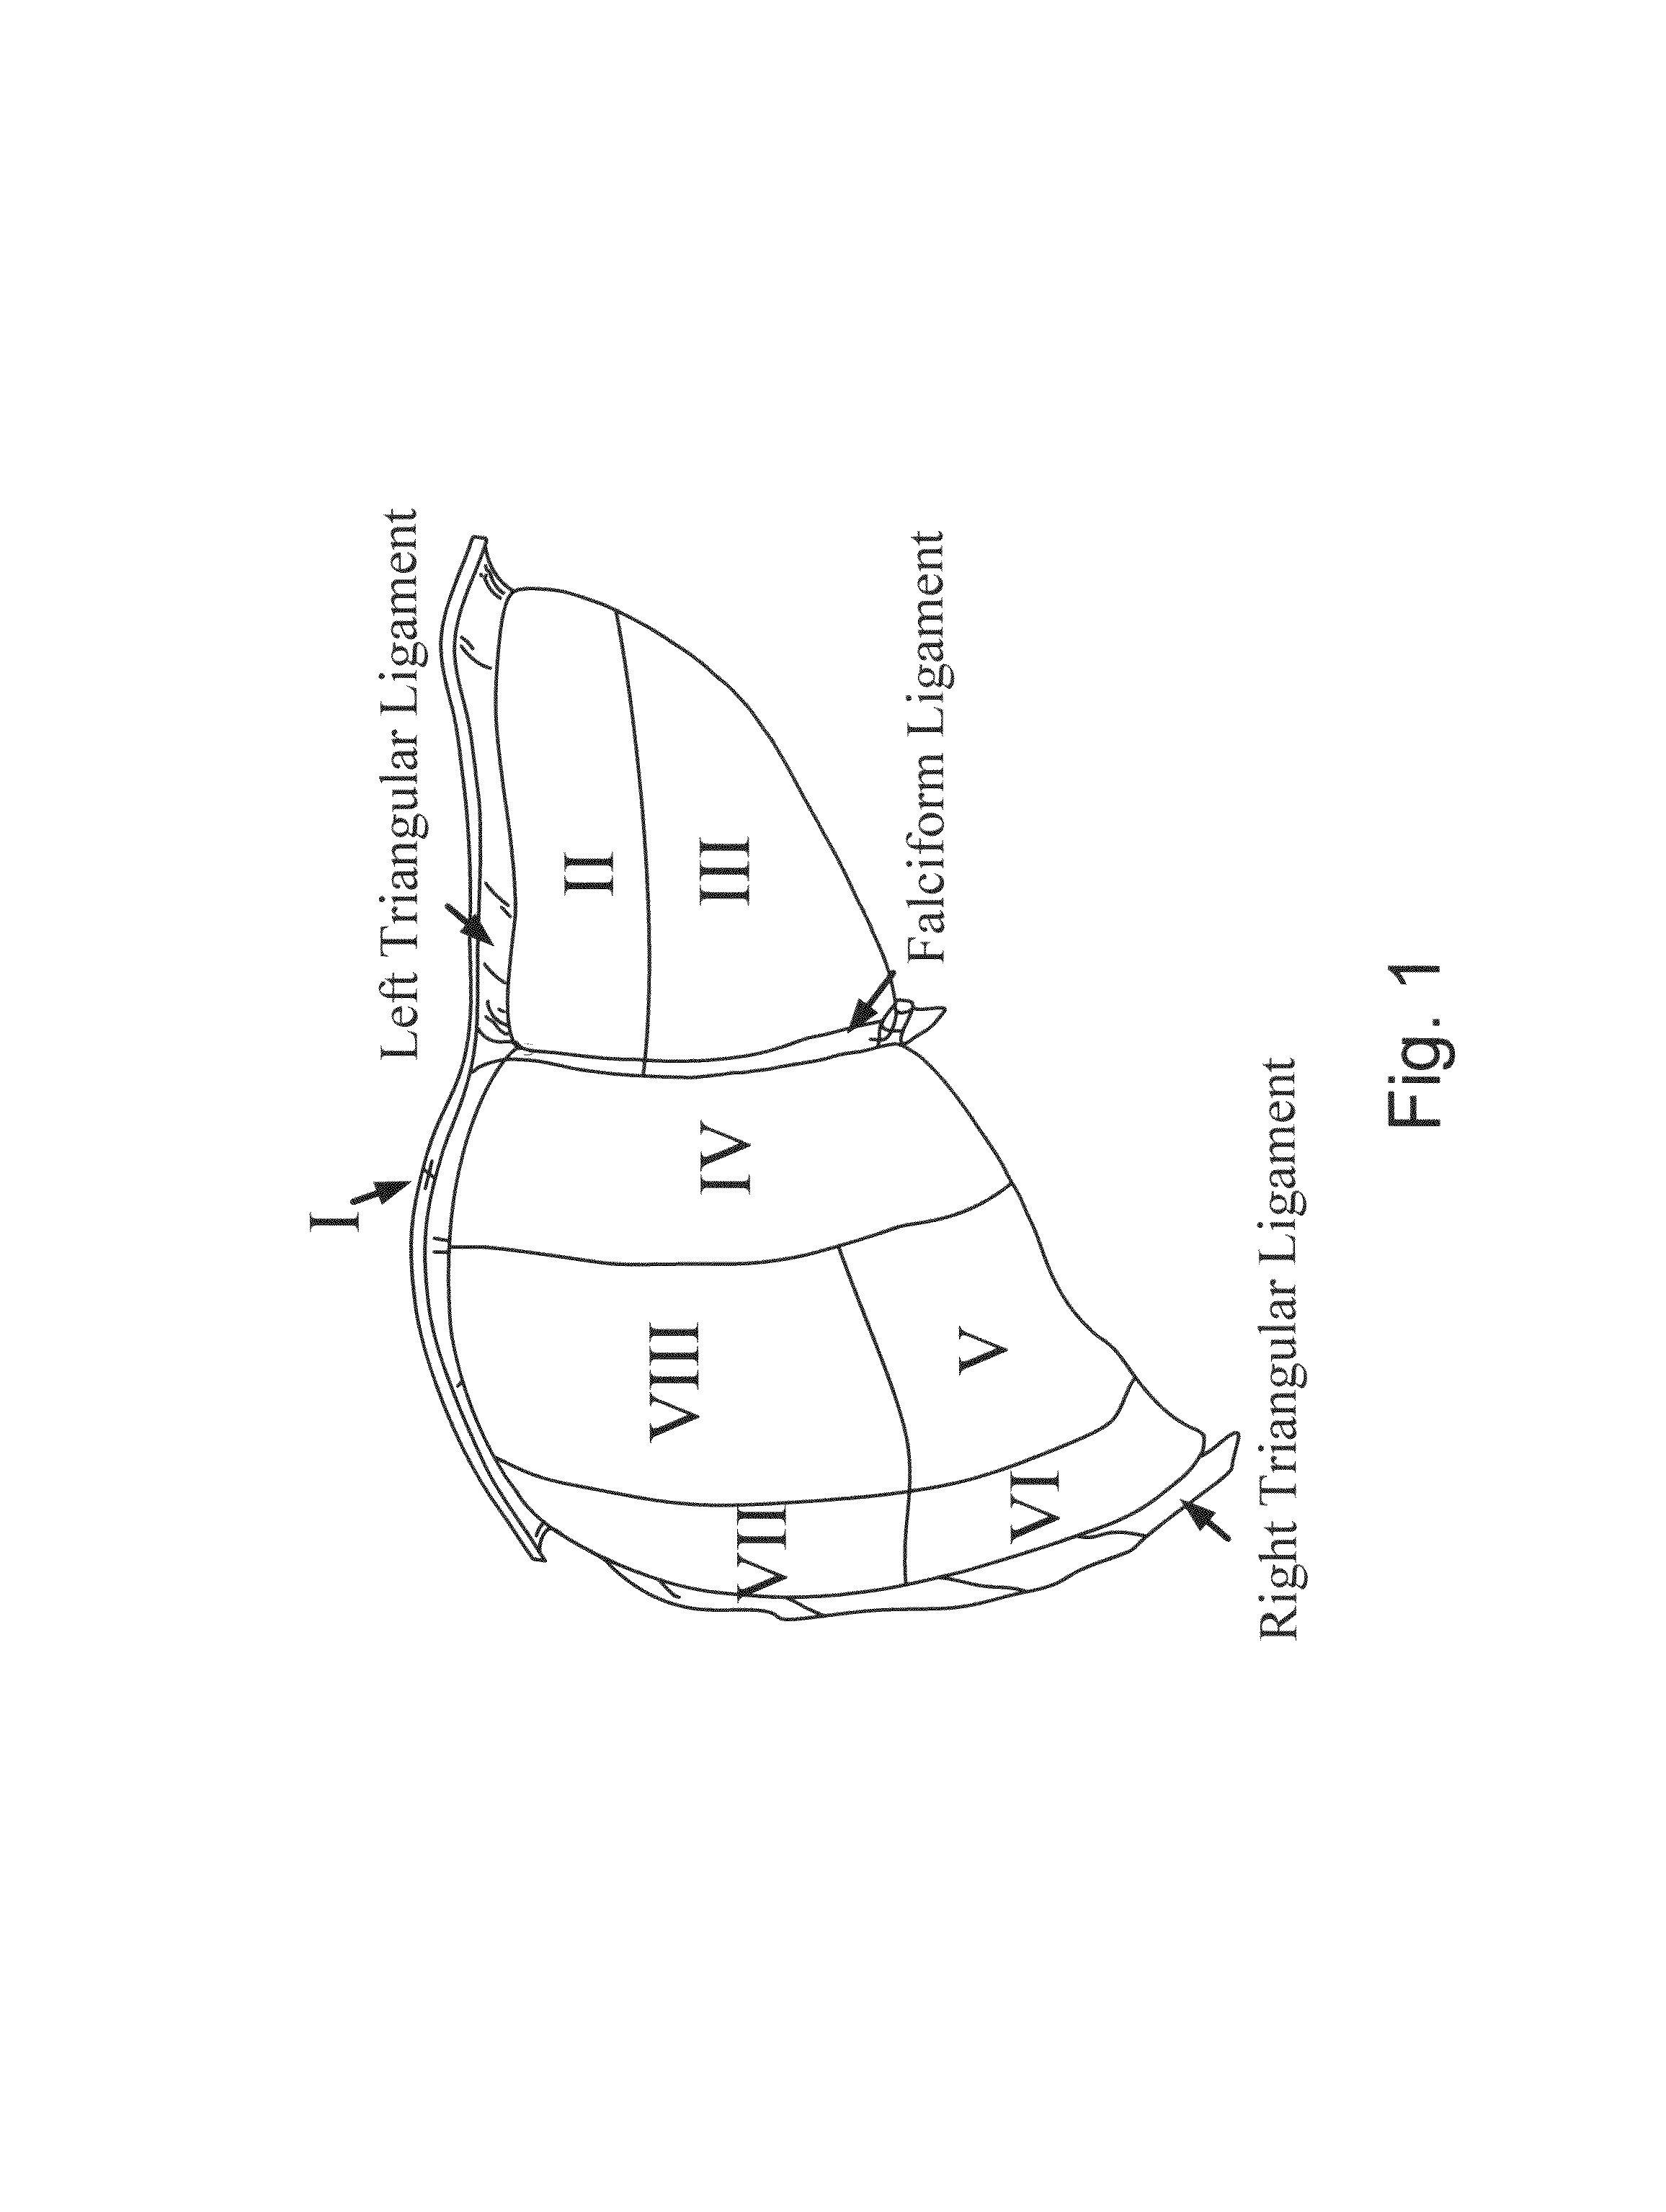 Apparatus and methods of compensating for organ deformation, registration of internal structures to images, and applications of same